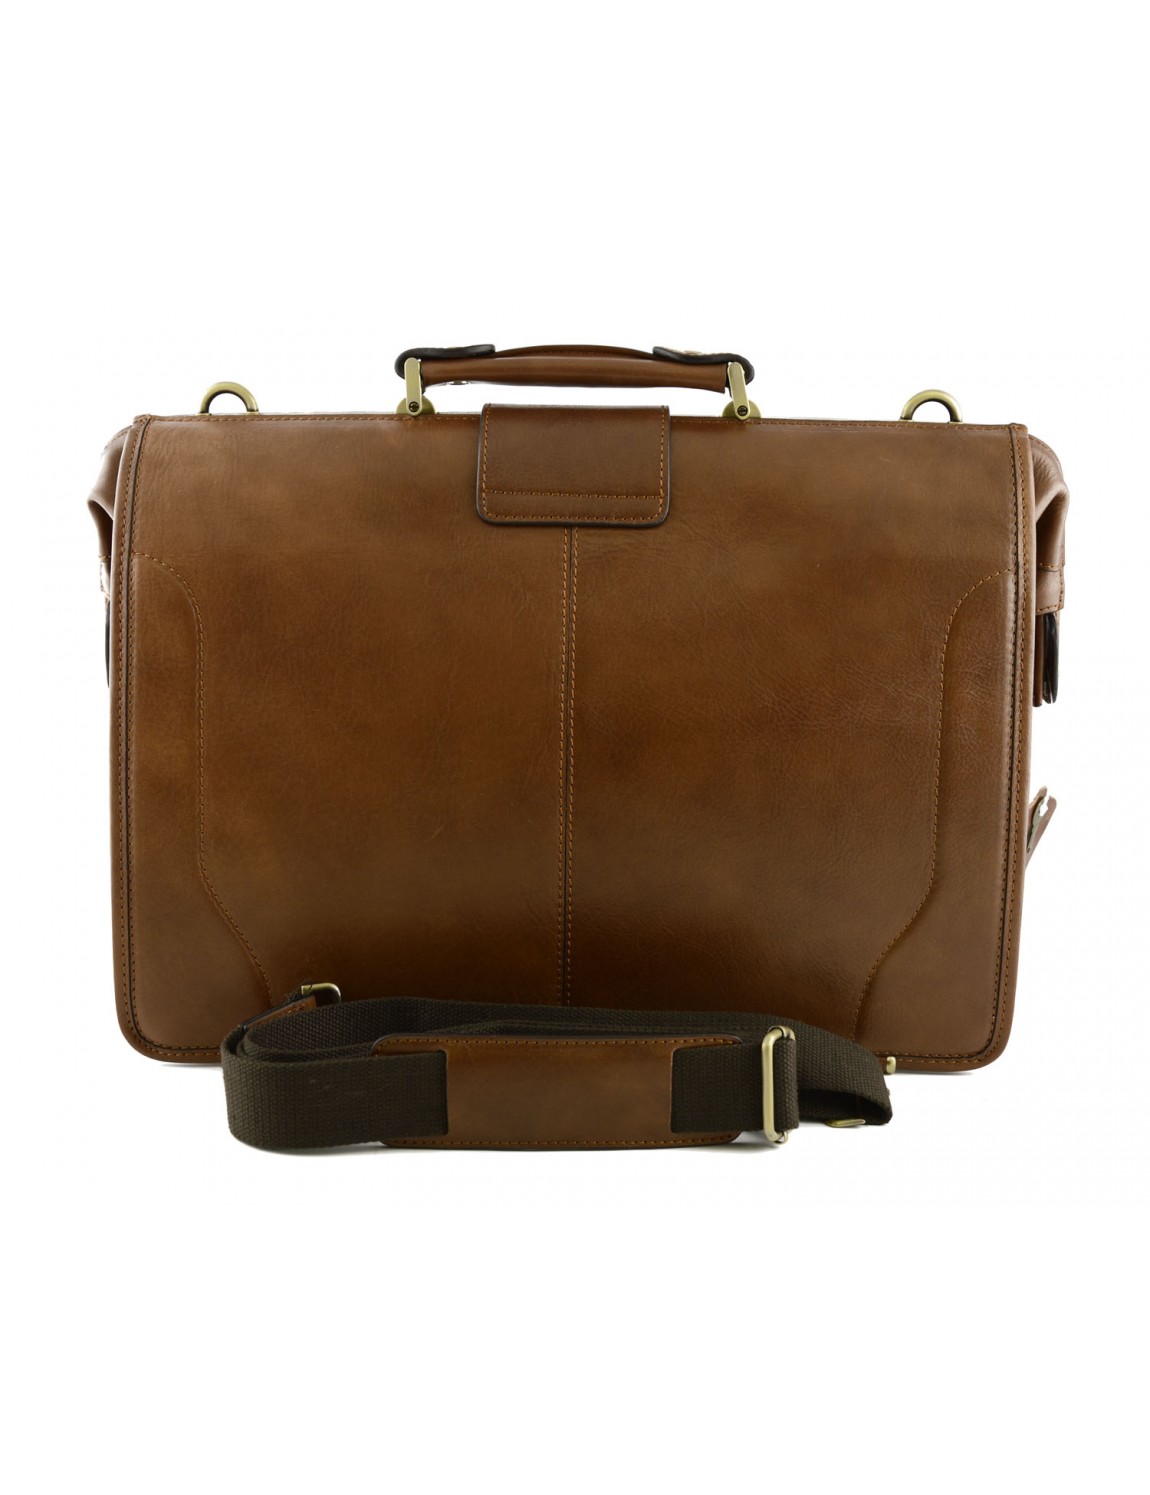 LEATHER DOCTOR BAG – Aigin Milano